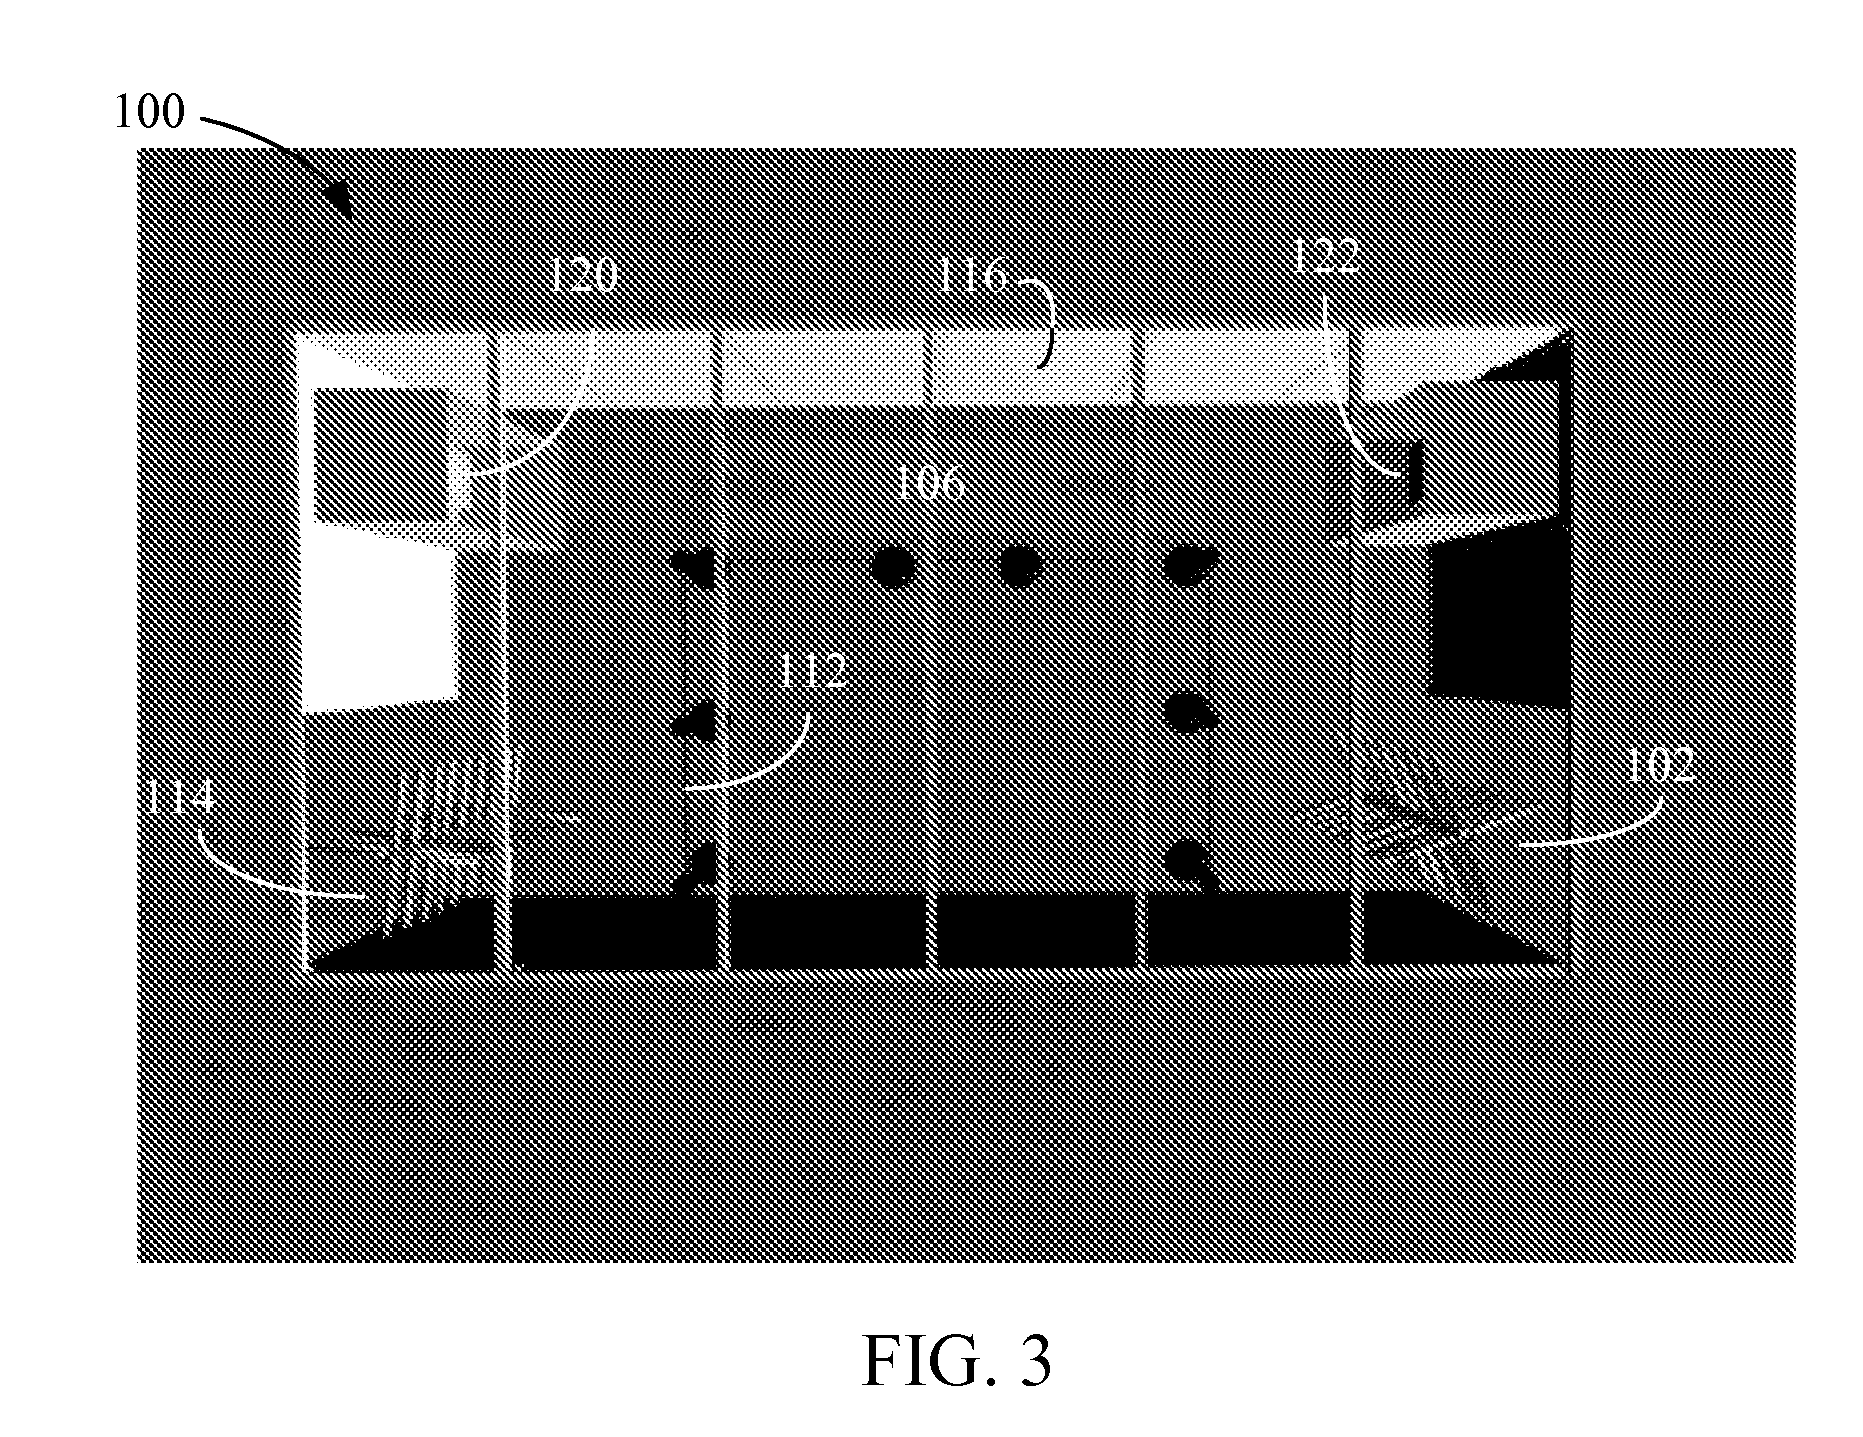 System for deployment of a millimeter wave concealed object detection system using an outdoor passively illuminated structure